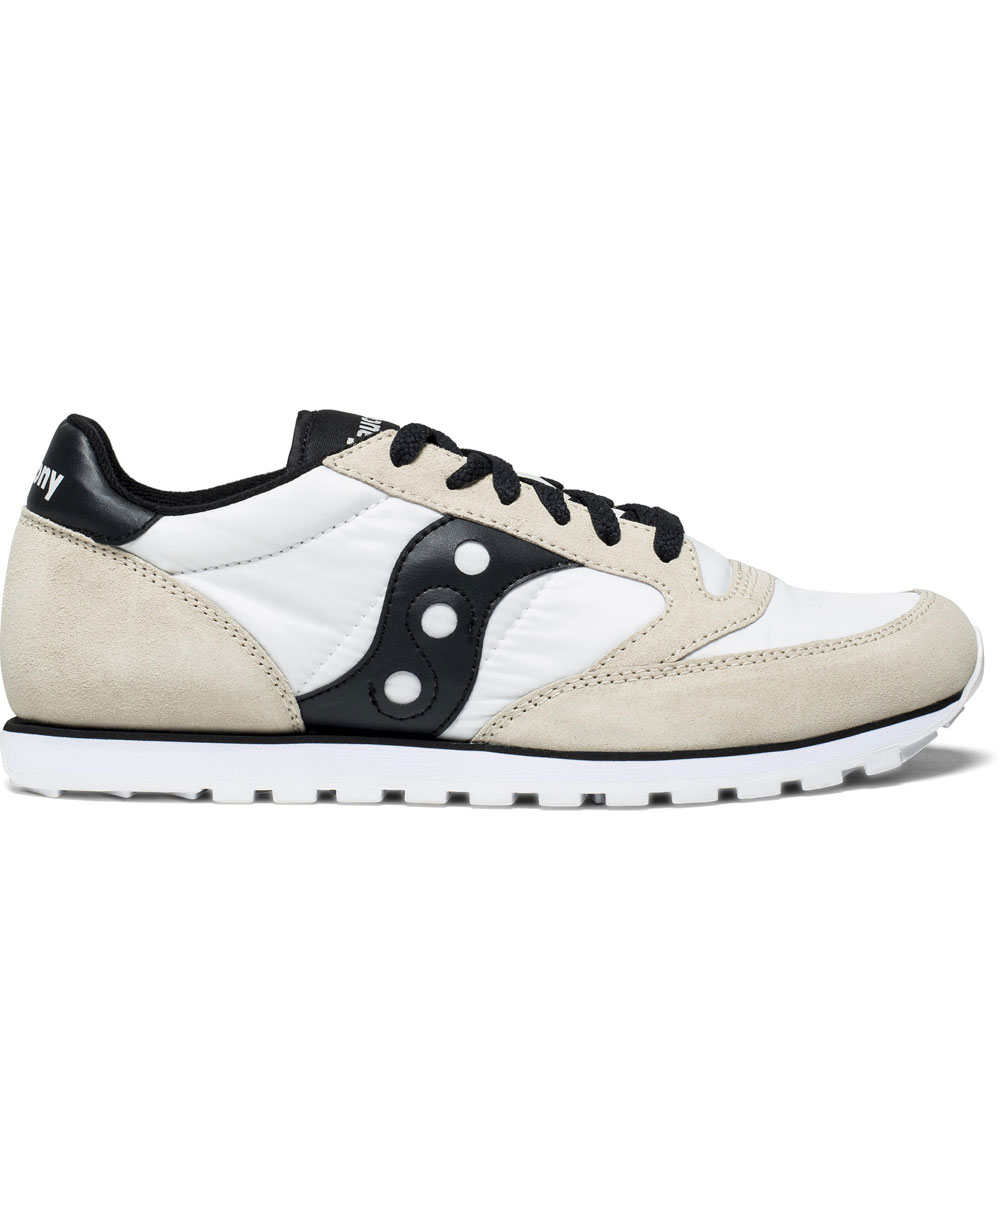 Jazz Low Pro Sneakers Shoes White 